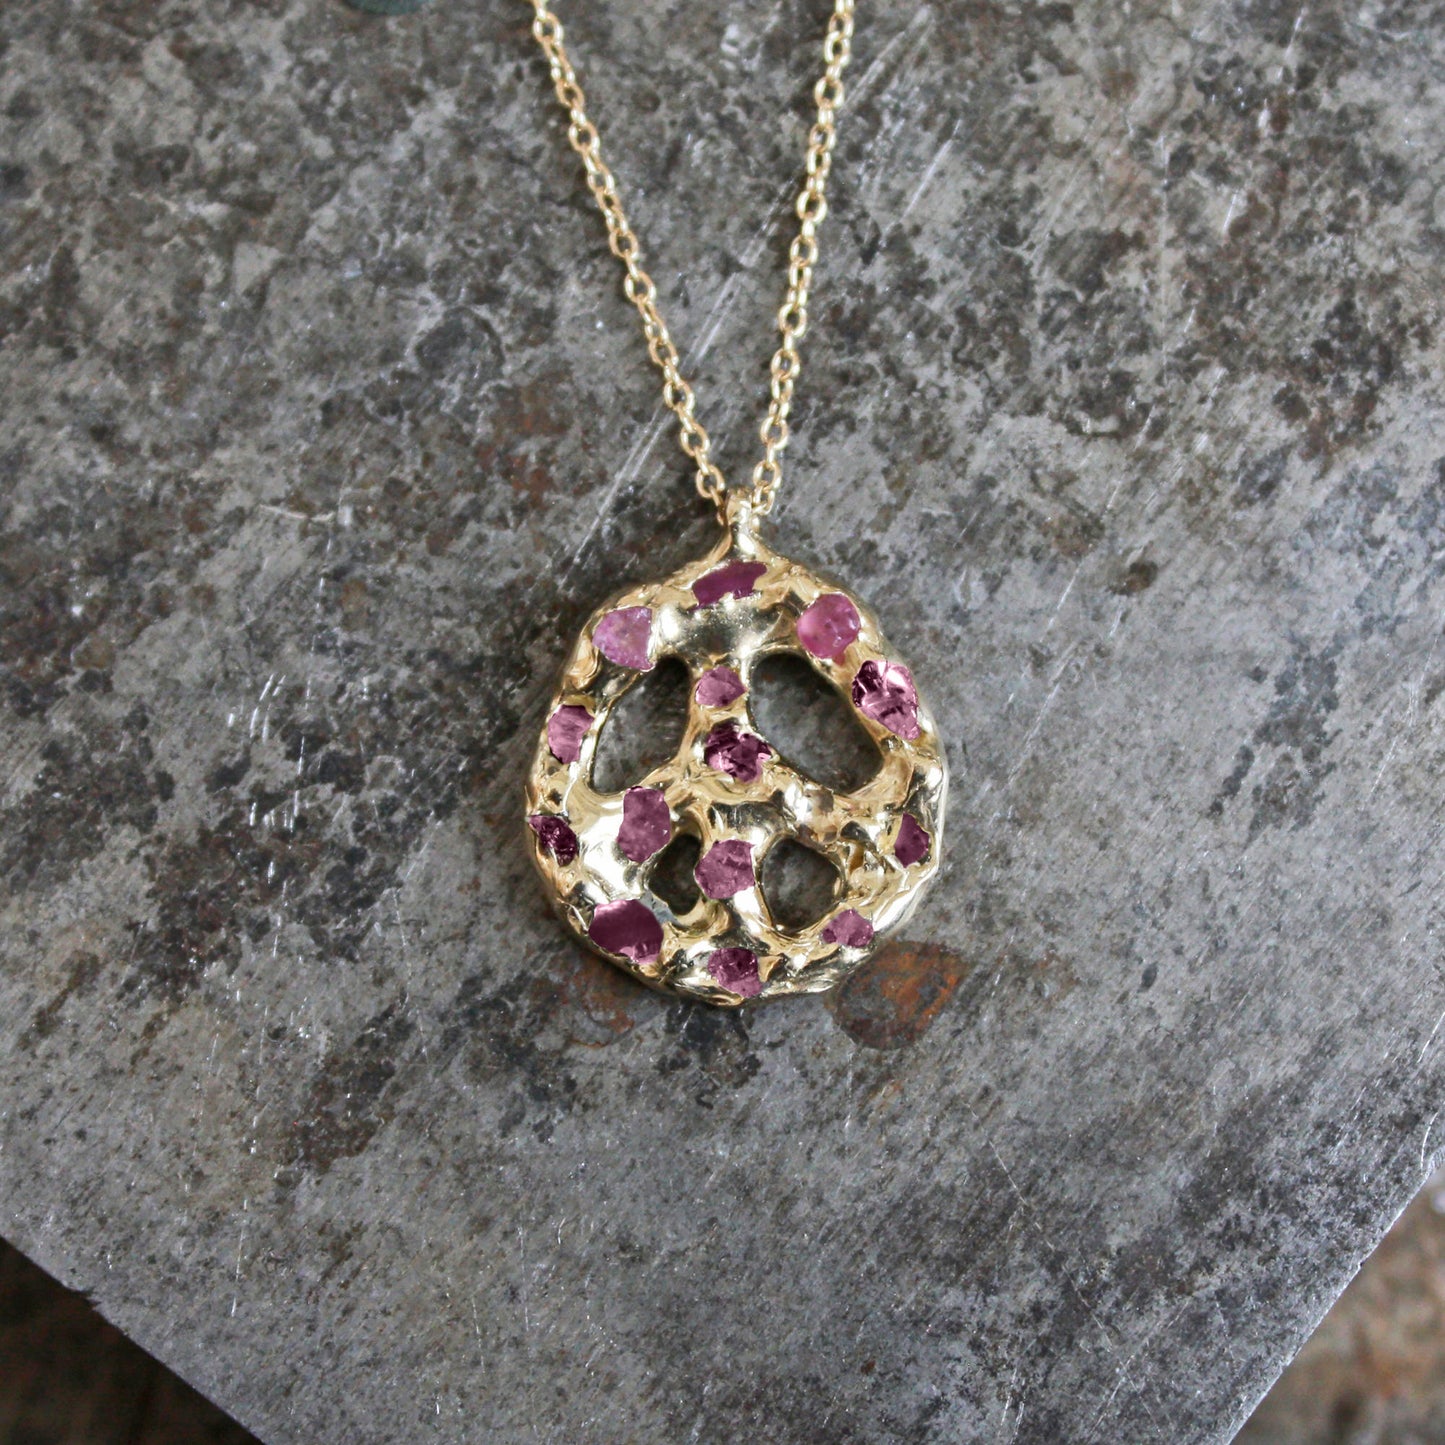 14k Gold 'Imagine' Pendant Necklace with Pink Sapphires